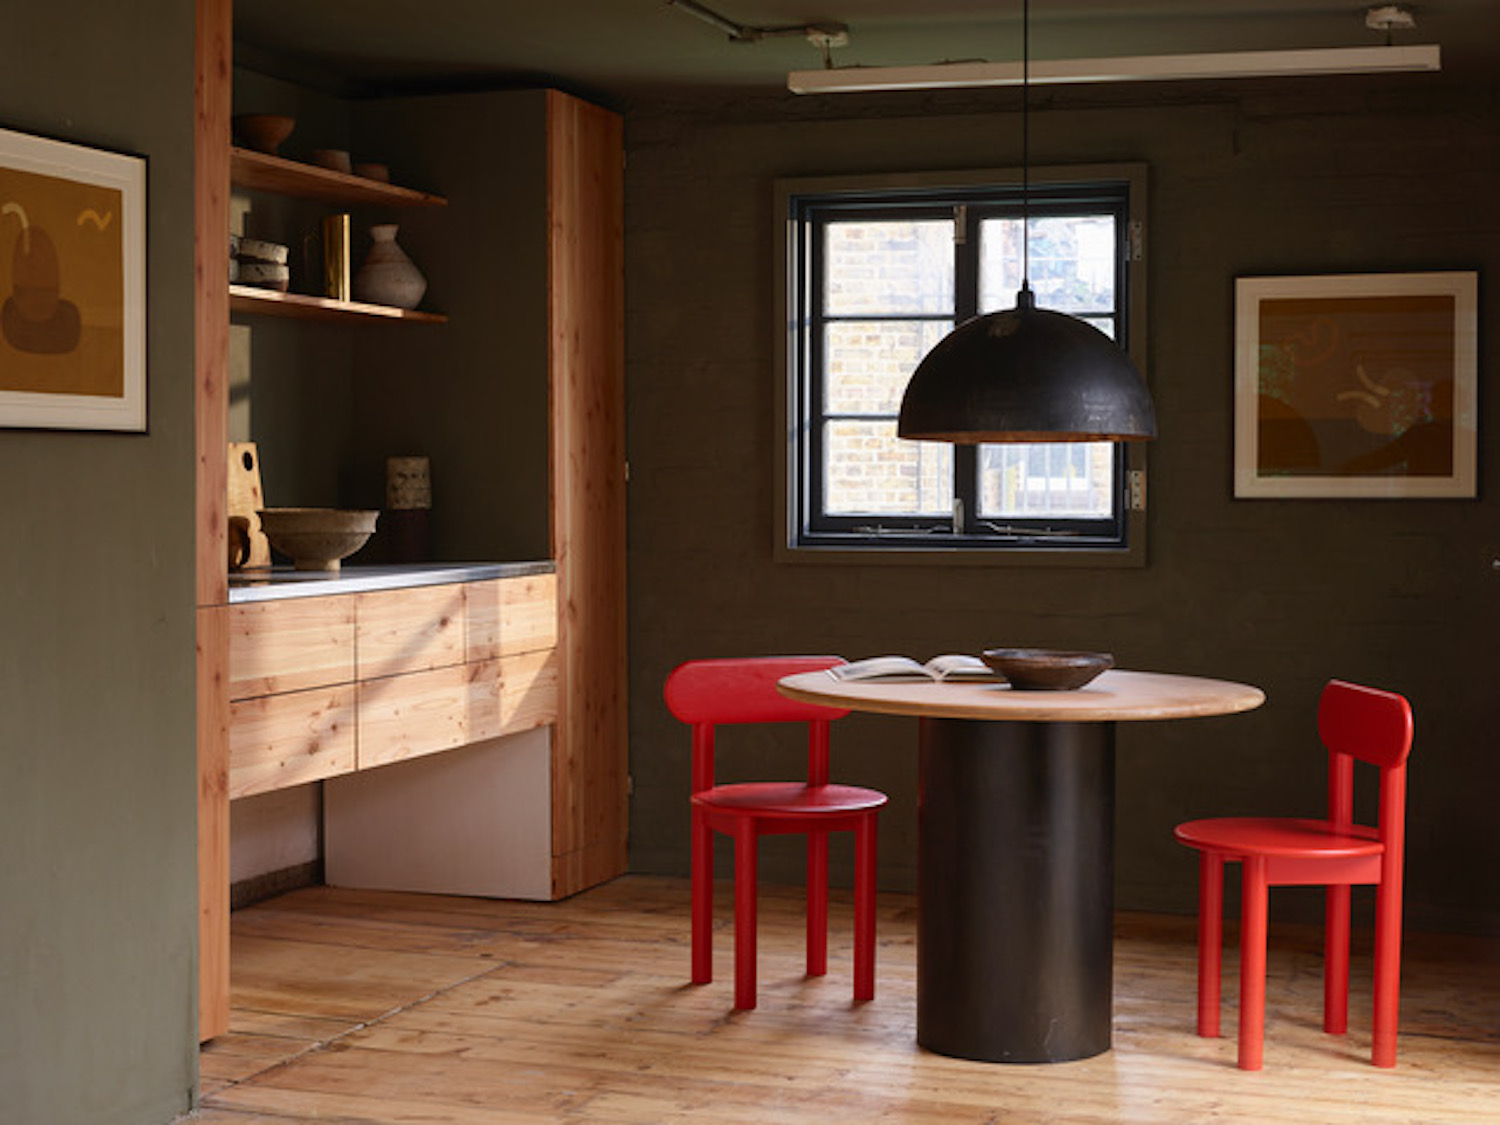 the studio kitchen; see more at fred rigby studio: a new creative space for fre 9